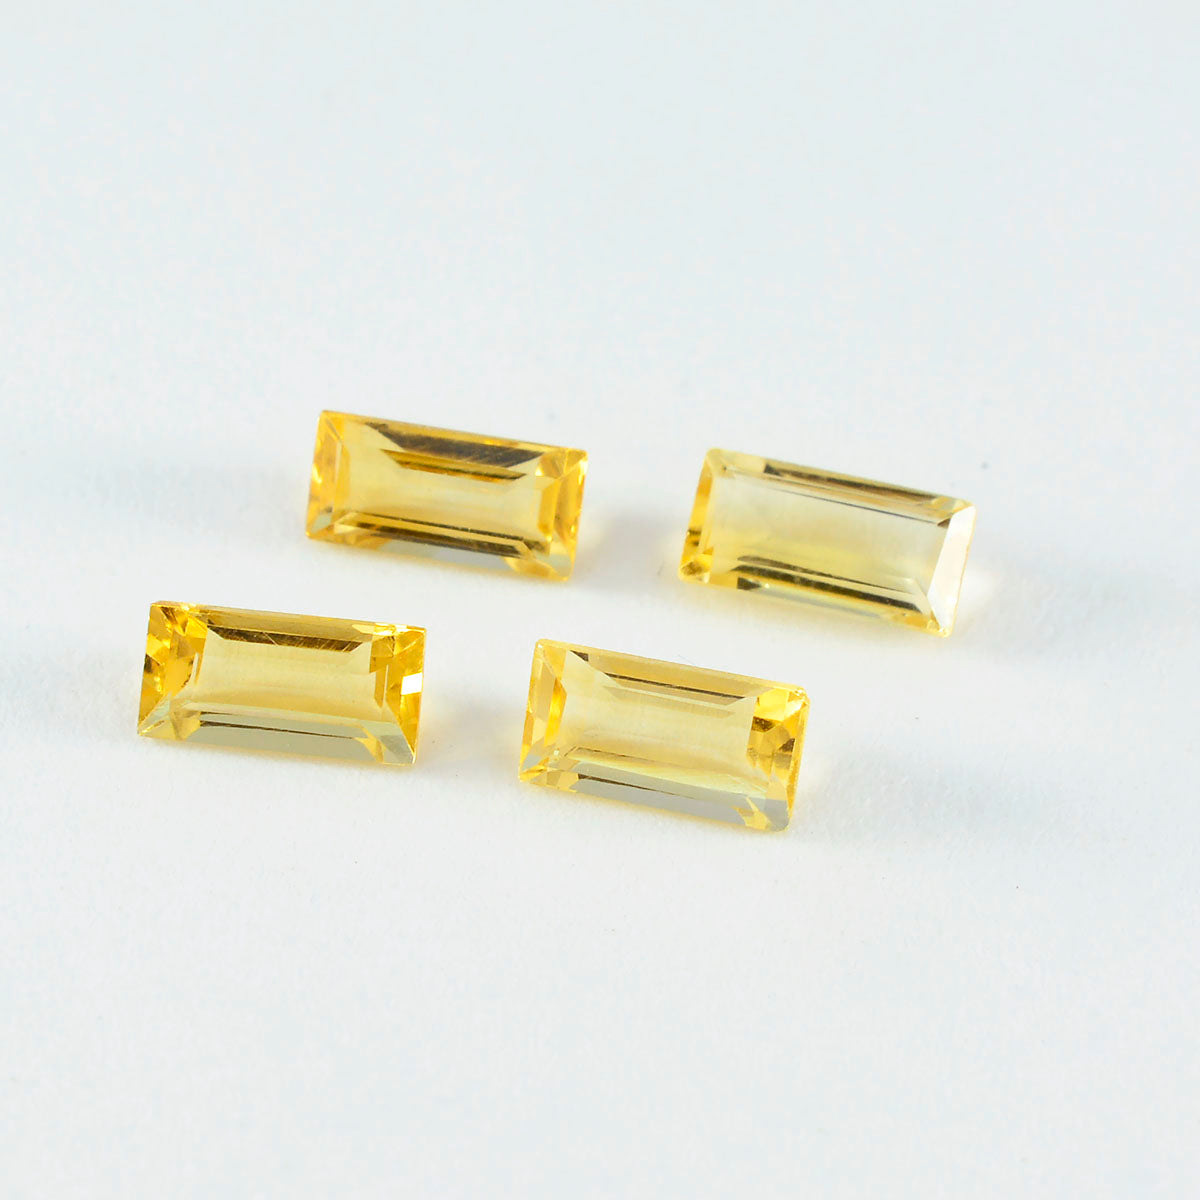 Riyogems 1PC Genuine Yellow Citrine Faceted 3x6 mm  Baguette Shape sweet Quality Stone